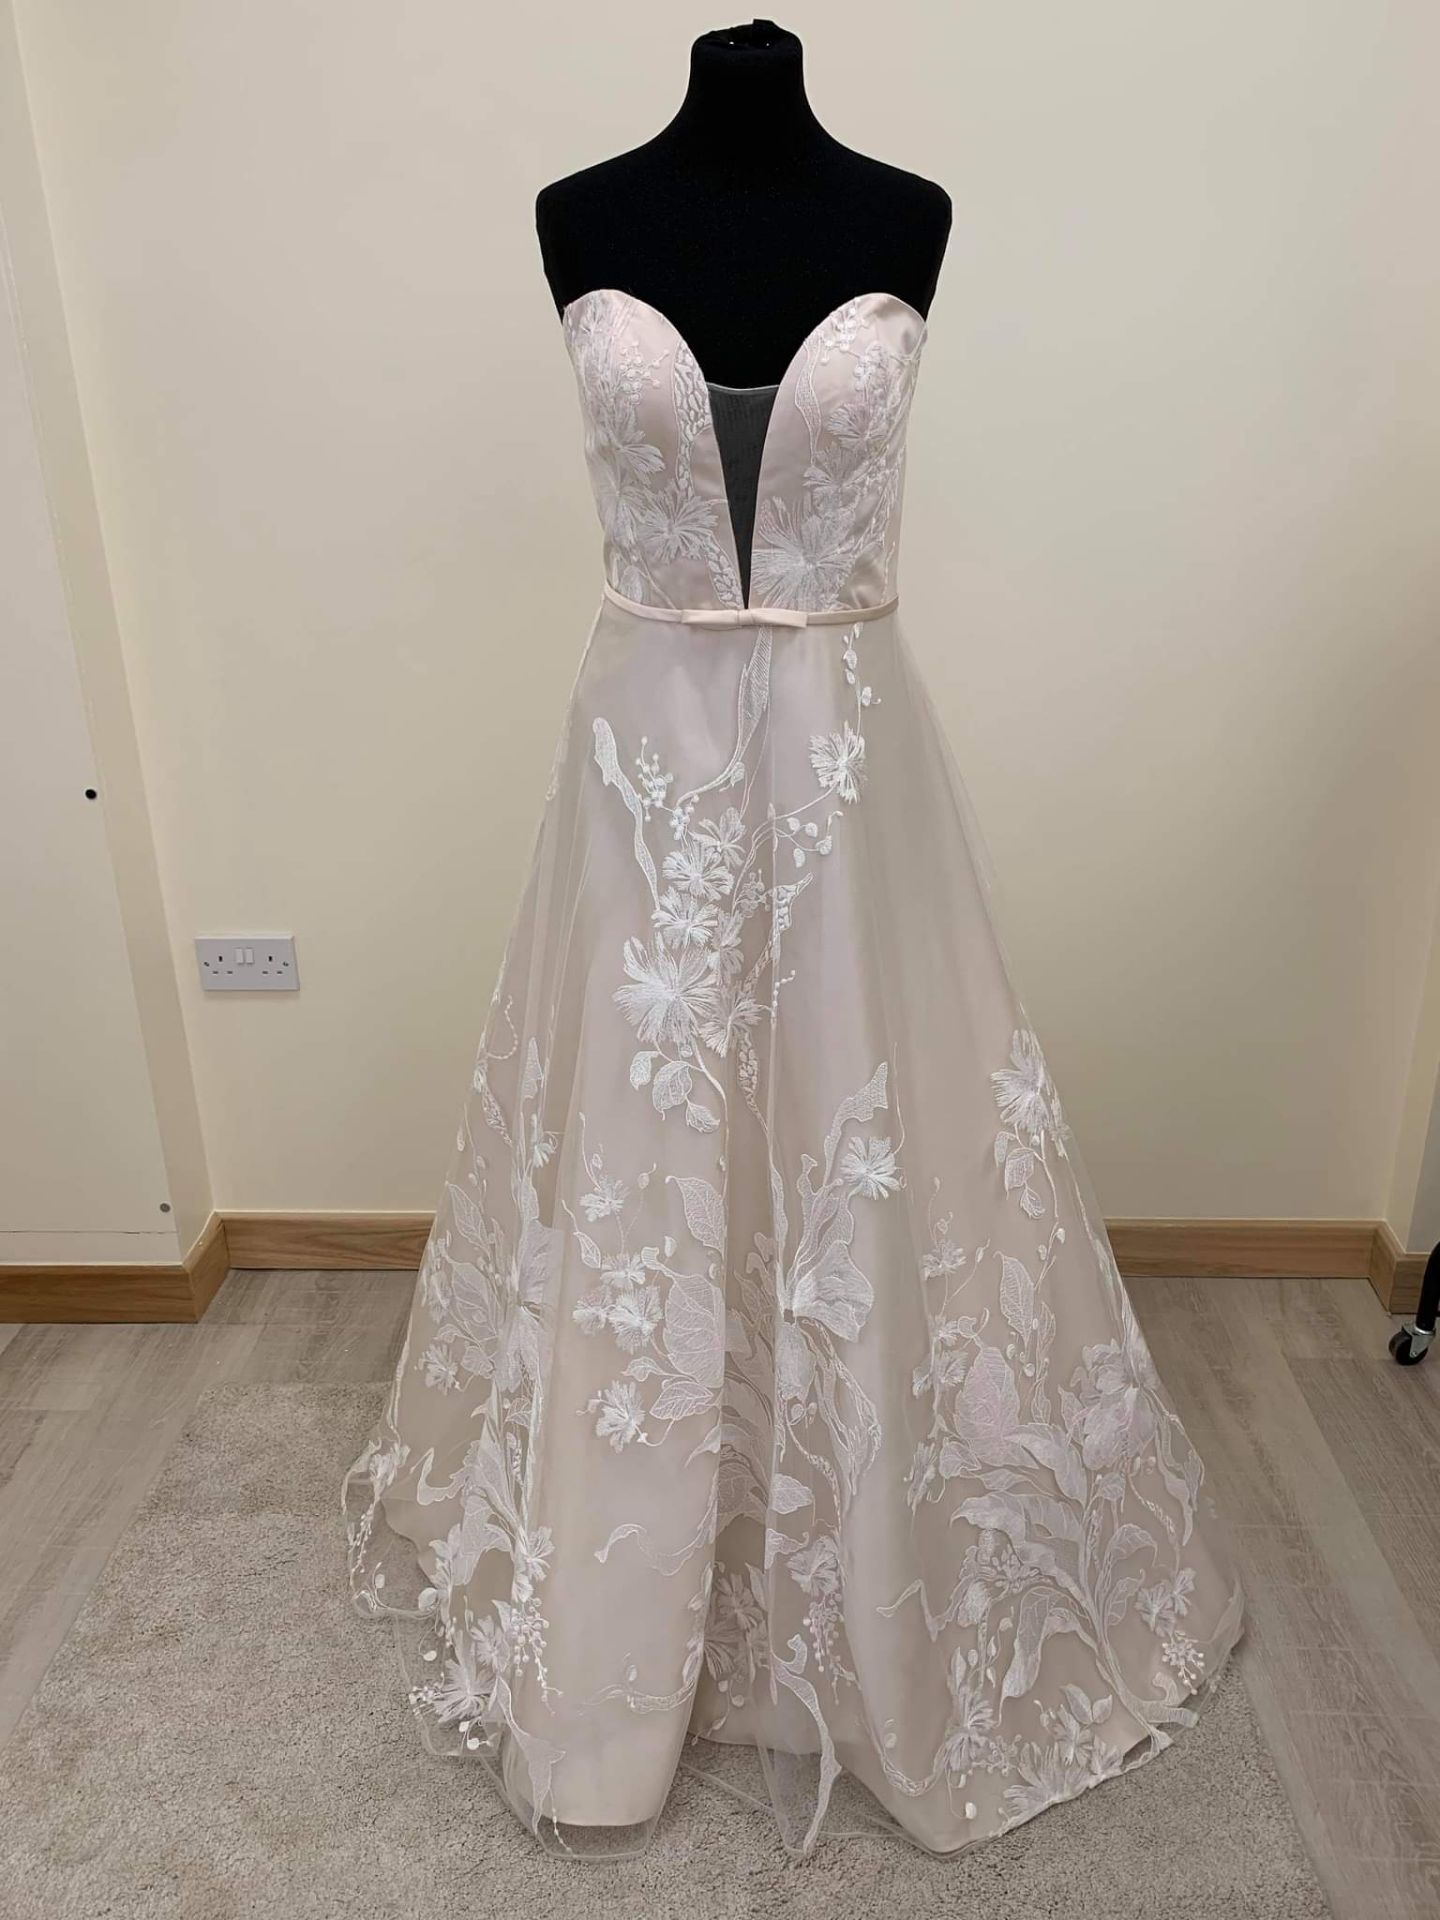 Bulk Lot of Wedding Dresses/Skirts/Bodices All Mixed Sizes and Designs RRP Circa £25k - Image 2 of 3